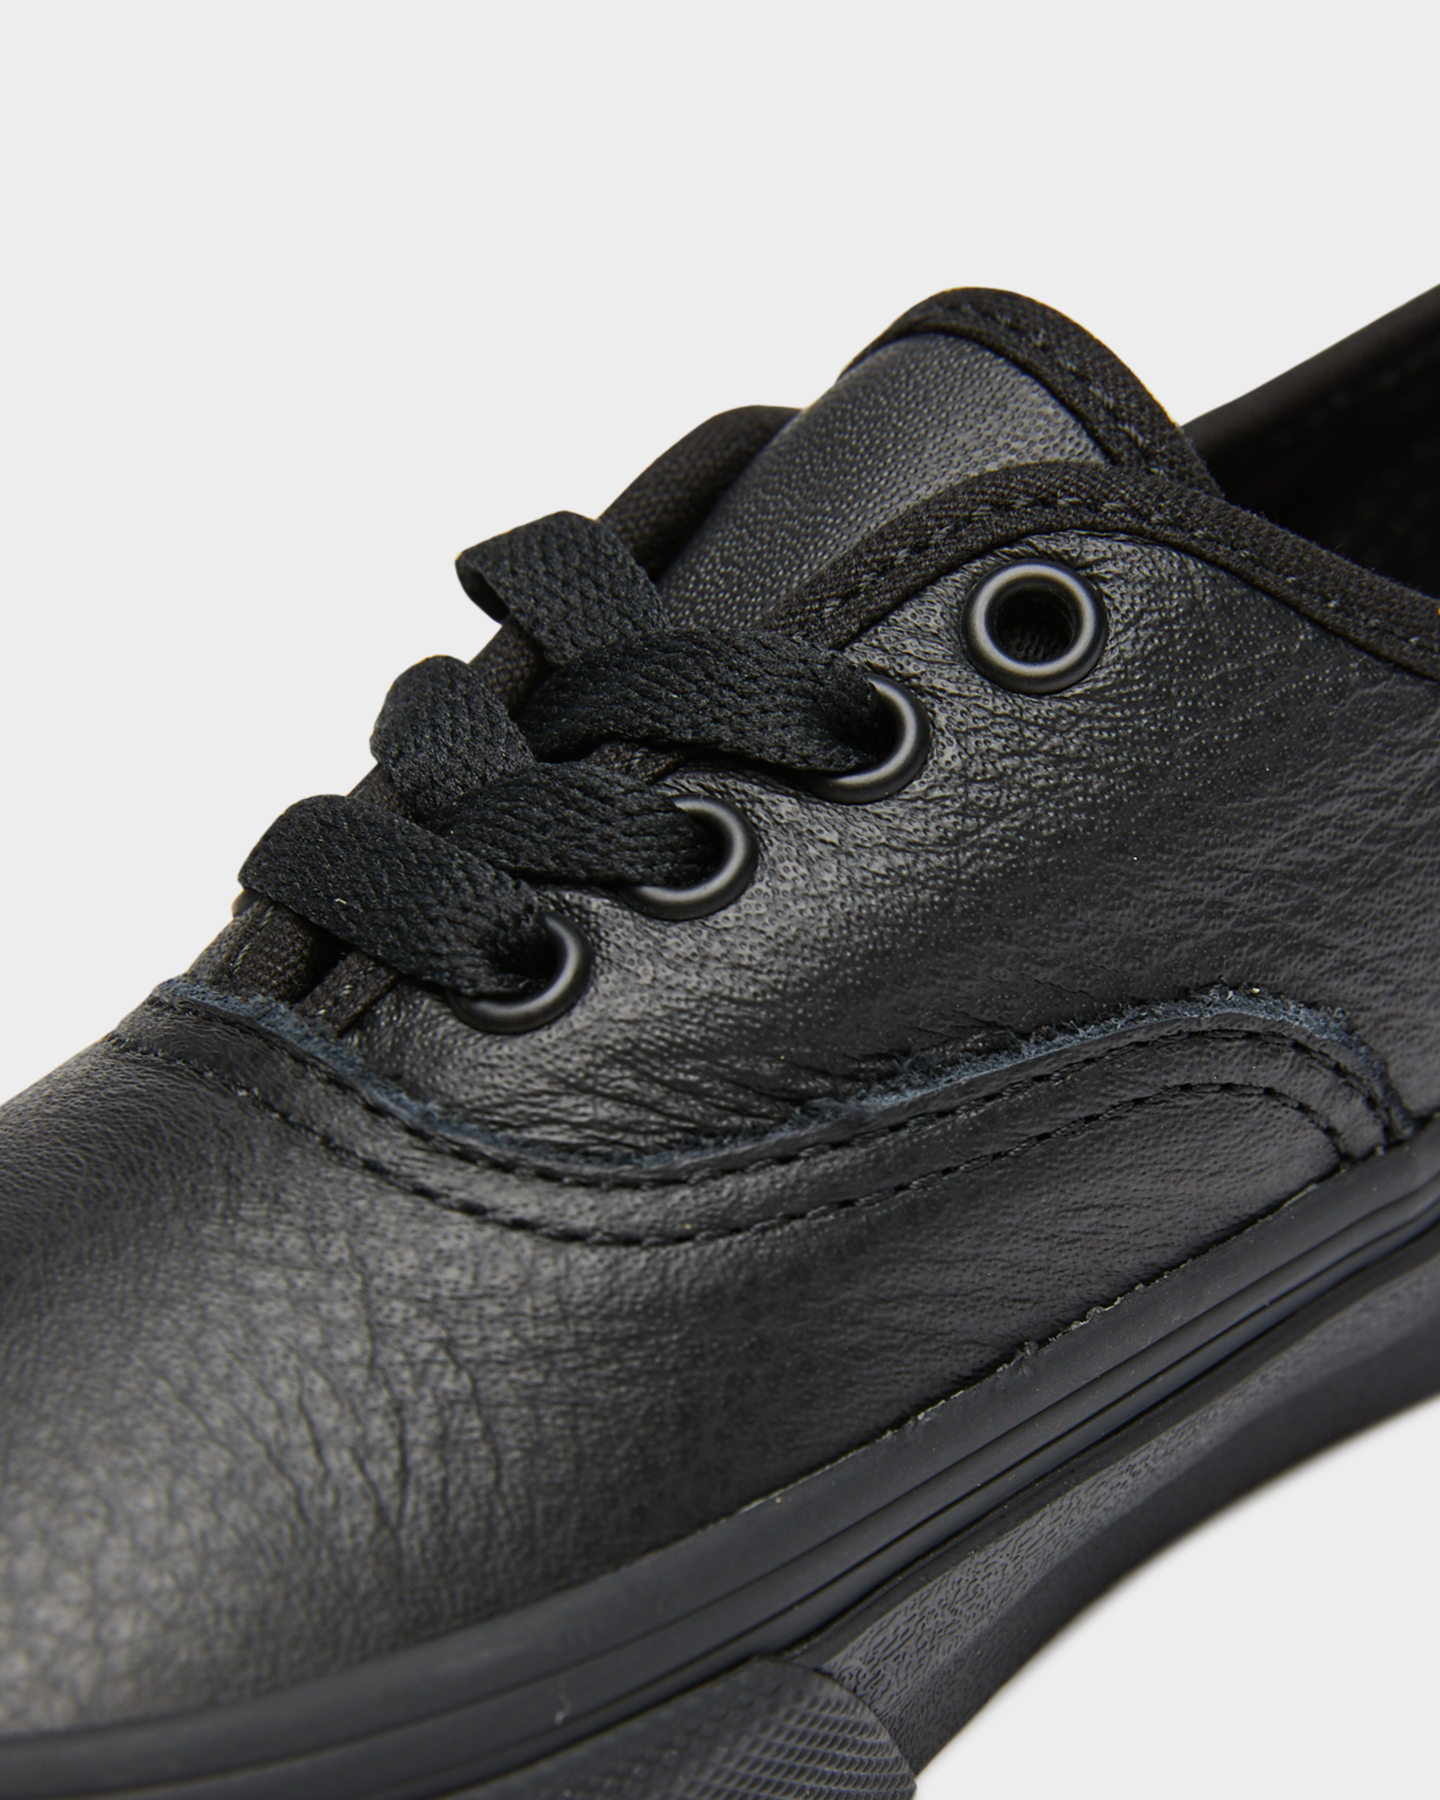 Vans Authentic Leather Shoe - Youth 